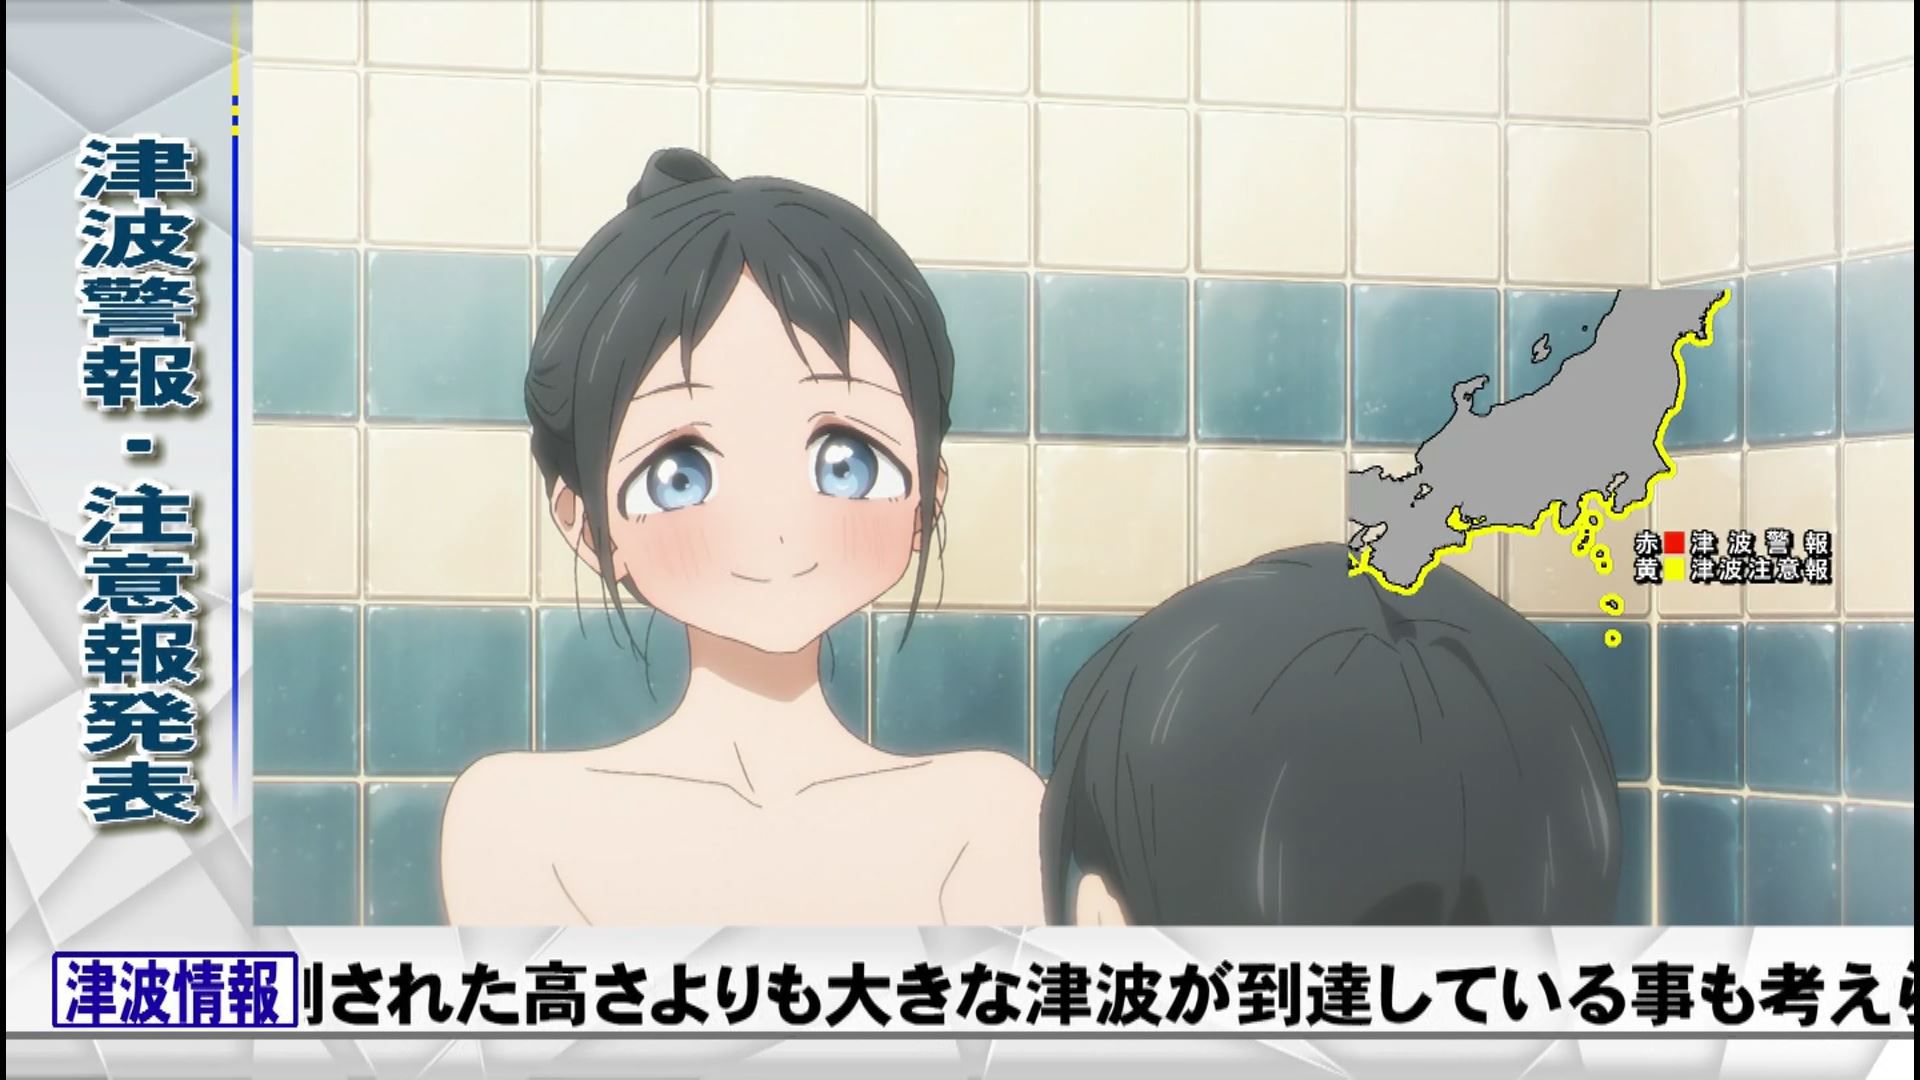 In the anime "Tomorrow-chan's Sailor Suit" episode 2, the girl's erotic bathing scene and the punchy scene 20